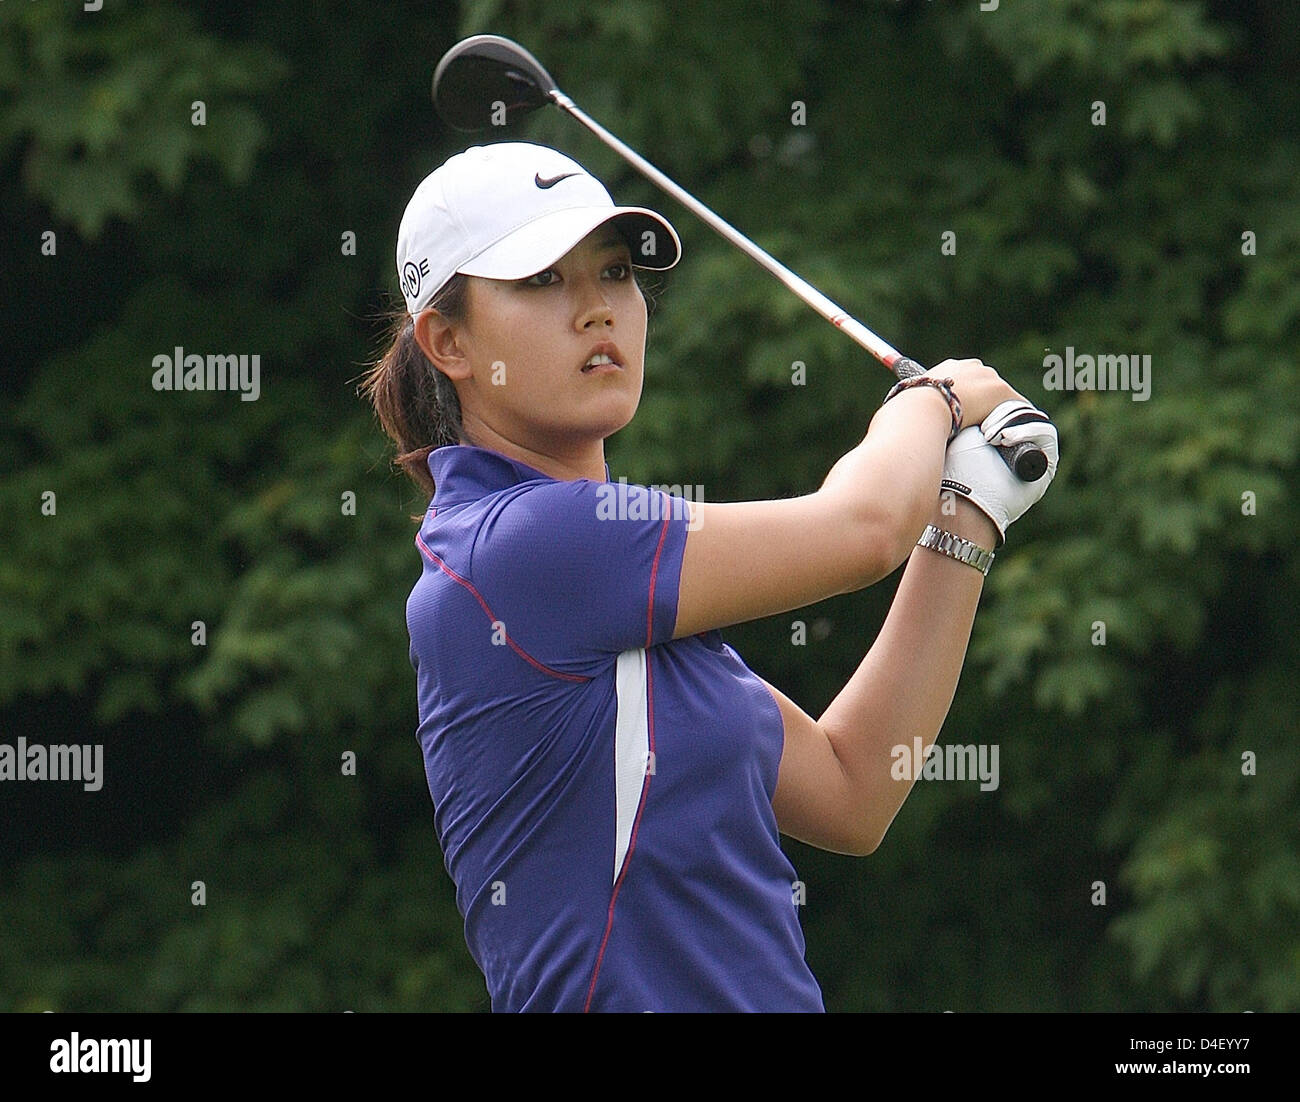 US professional golfer of Korean origin, Michelle Wie, pictured in action on golf course 'Gut Haeusern' near Markt Indersdorf, Germany, 28 May 2008. 121 professional golfers and seven amateurs will participate in the 'HypoVereinsbank Ladies German Open 2008' being held from 29 May until 01 June. The top 60 players will compete in the finals on the weekend. Photo: URSULA DUEREN Stock Photo